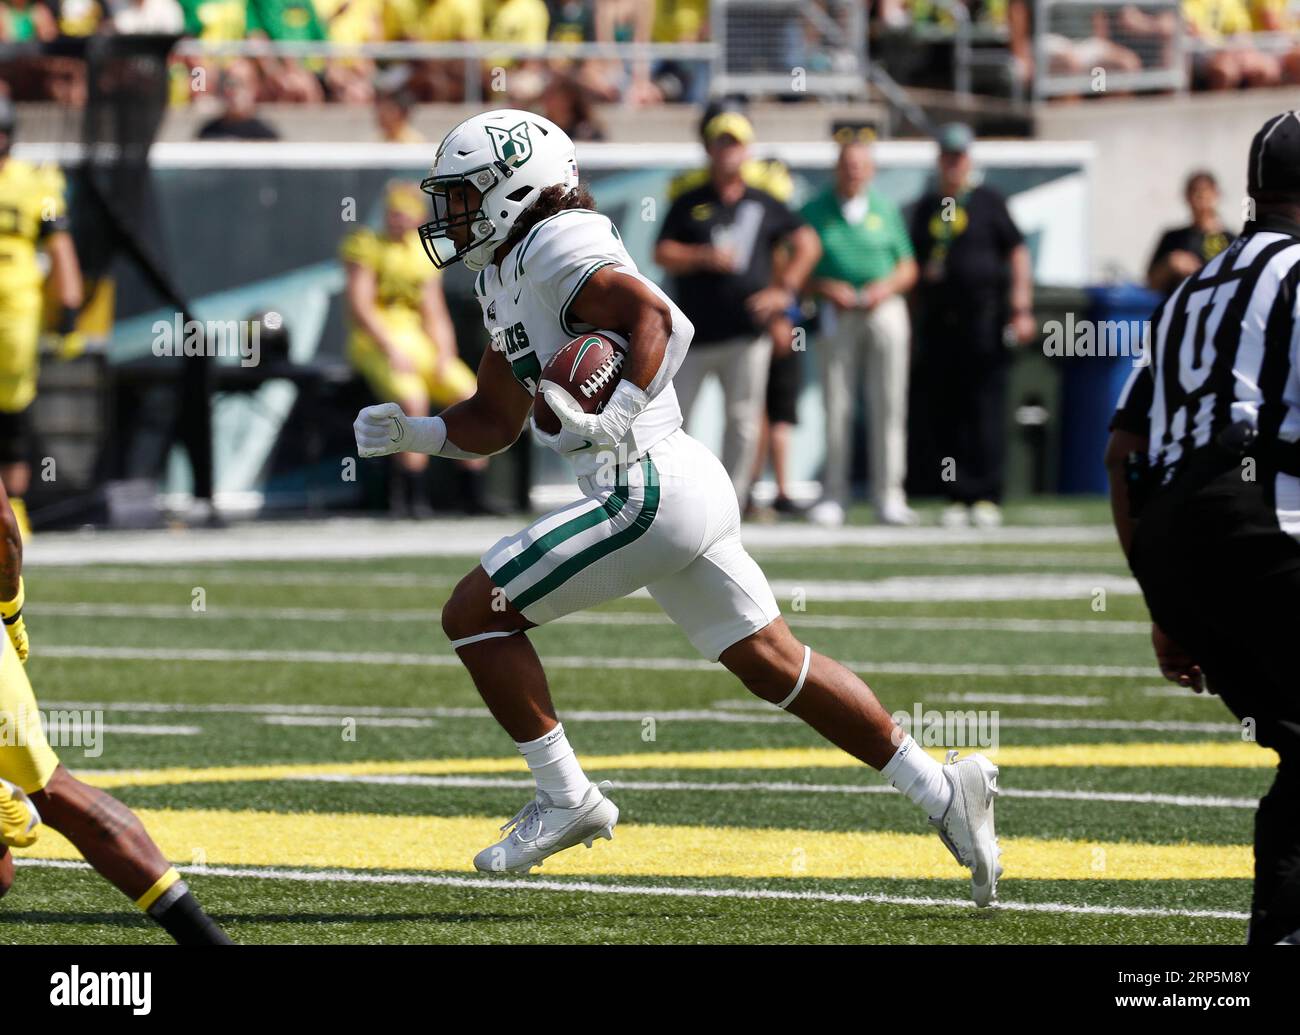 Autzen Stadium, Eugene, OR, USA. 2nd Sep, 2023. Portland State Vikings running back Quincy Craig (17) carries the ball during the NCAA football game between the Portland State Vikings and the University of Oregon Ducks at Autzen Stadium, Eugene, OR. Larry C. Lawson/CSM (Credit Image: © Larry C. Lawson/Cal Sport Media). Credit: csm/Alamy Live News Stock Photo